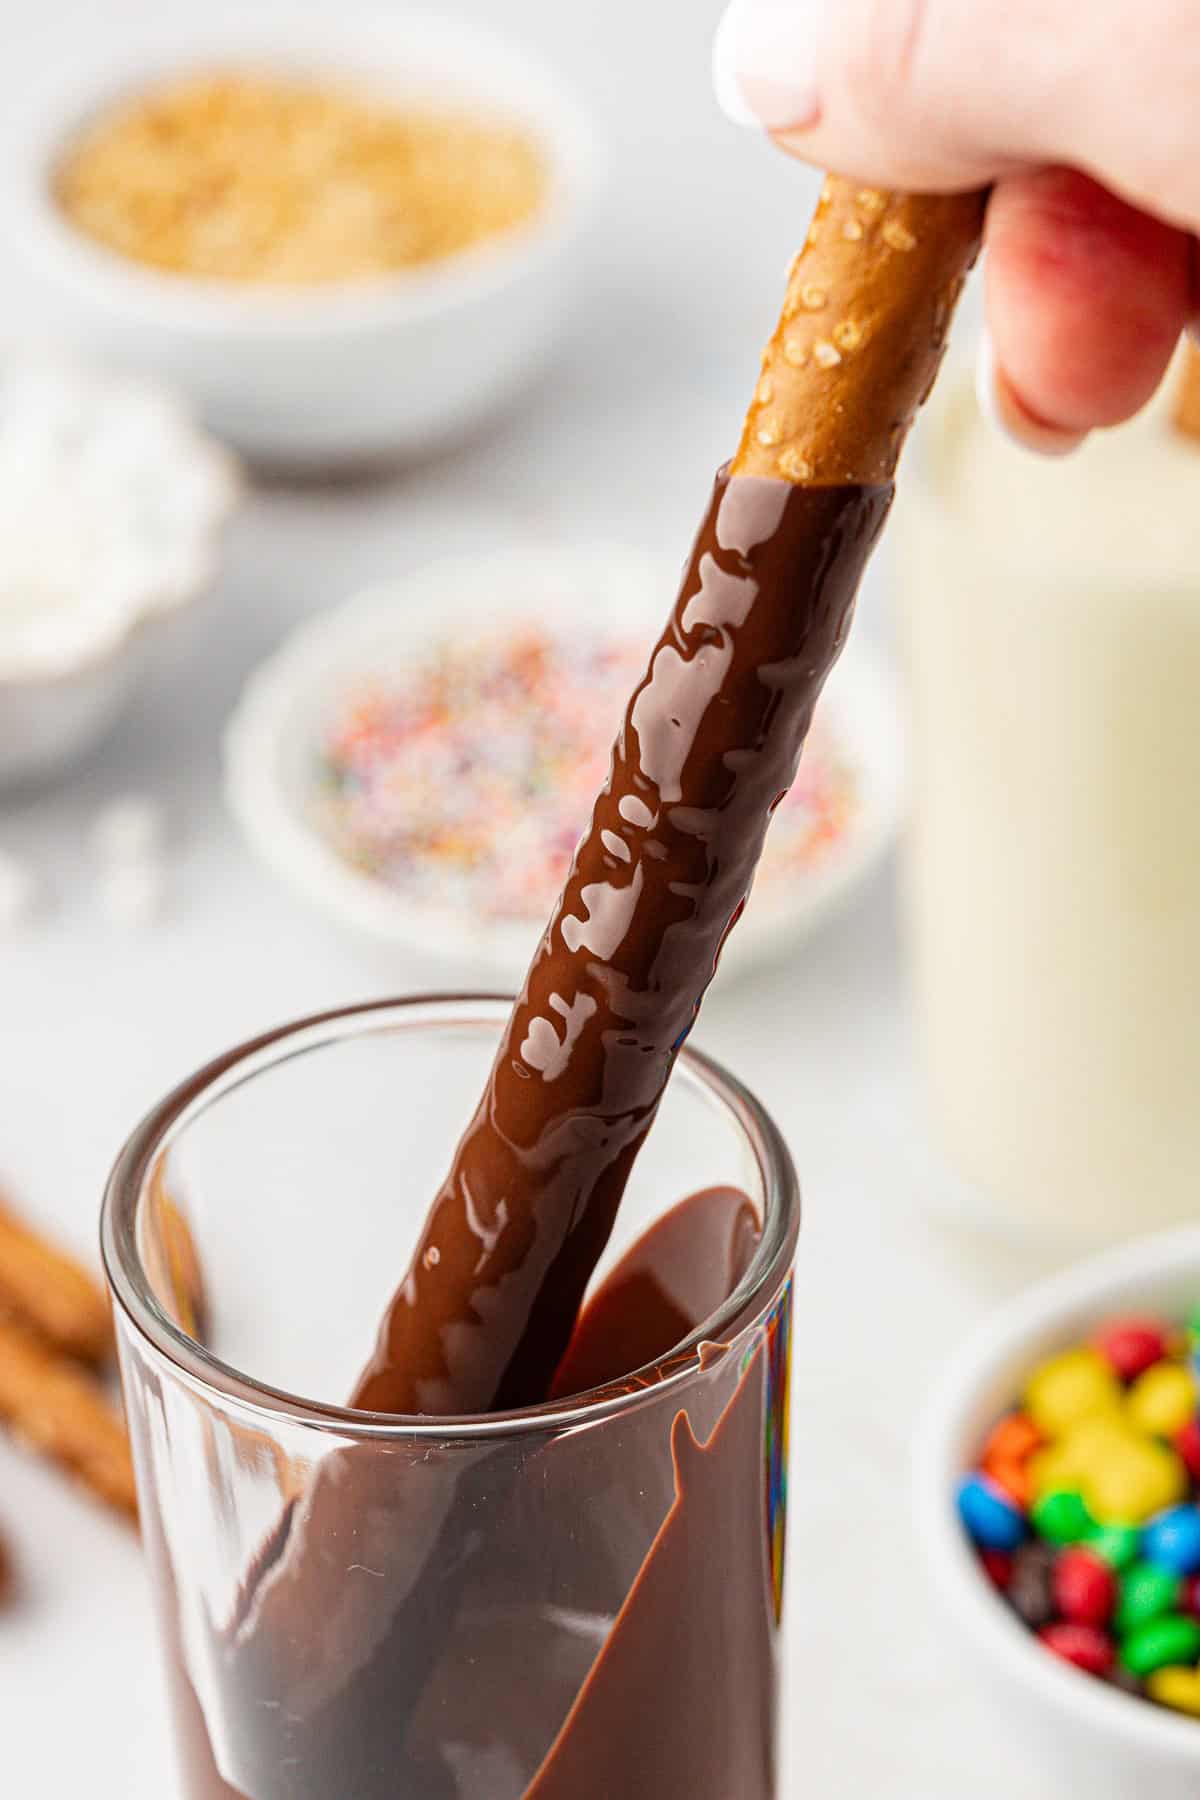 a pretzel rod being dipped into a glass of melted chocolate with several small bowls of different toppings like m&ms and sprinkles in the background